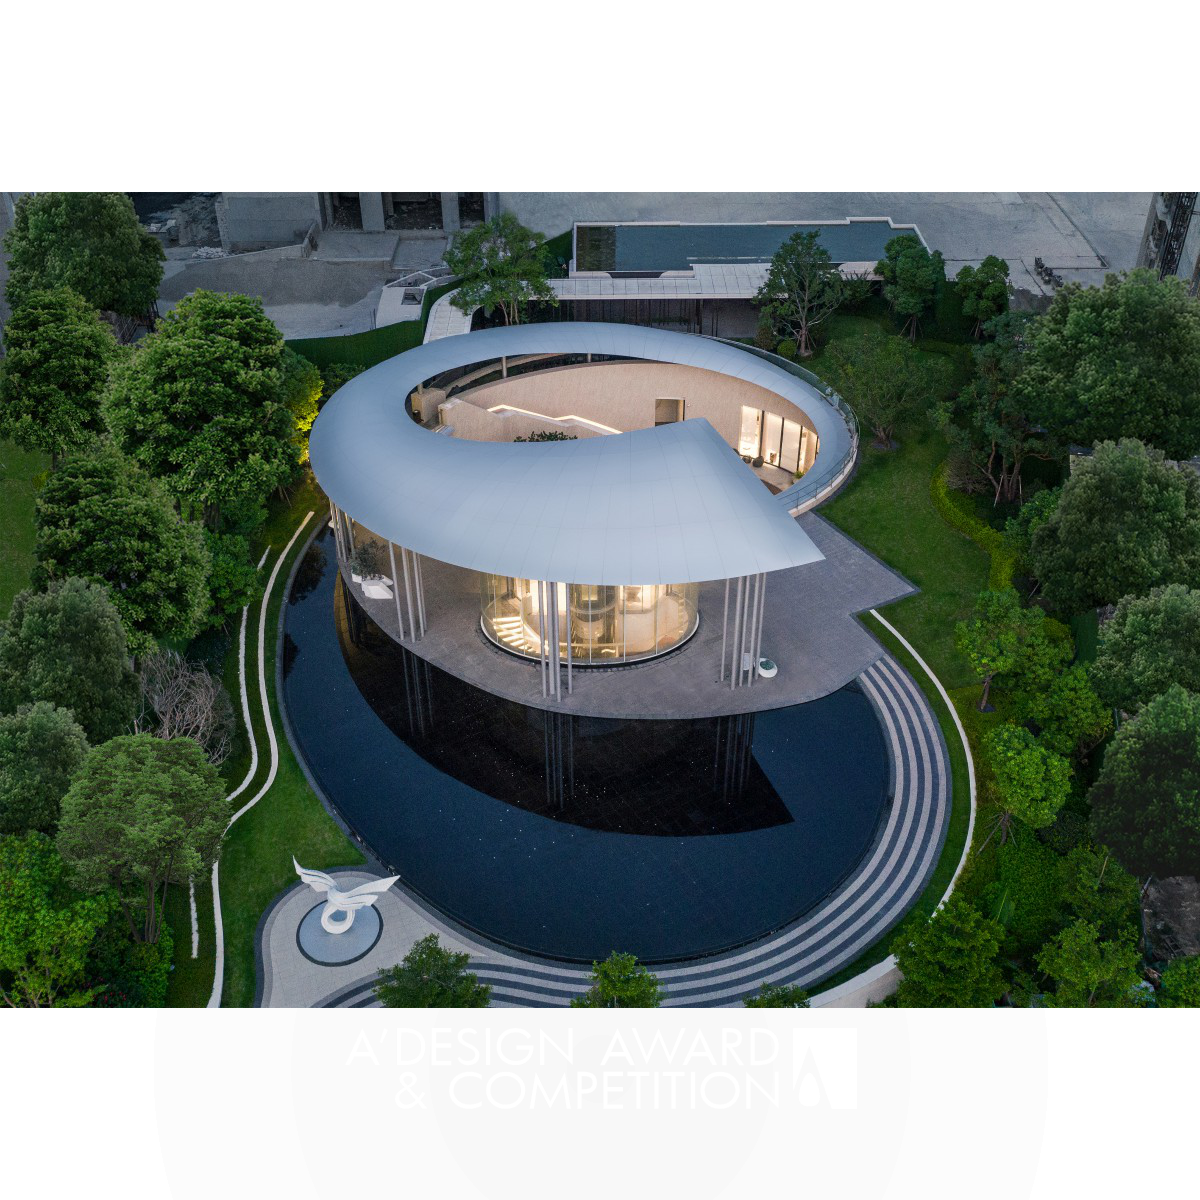 Zhubo Design wins Silver at the prestigious A' Architecture, Building and Structure Design Award with Yueyun Teahouse Exhibition Center.